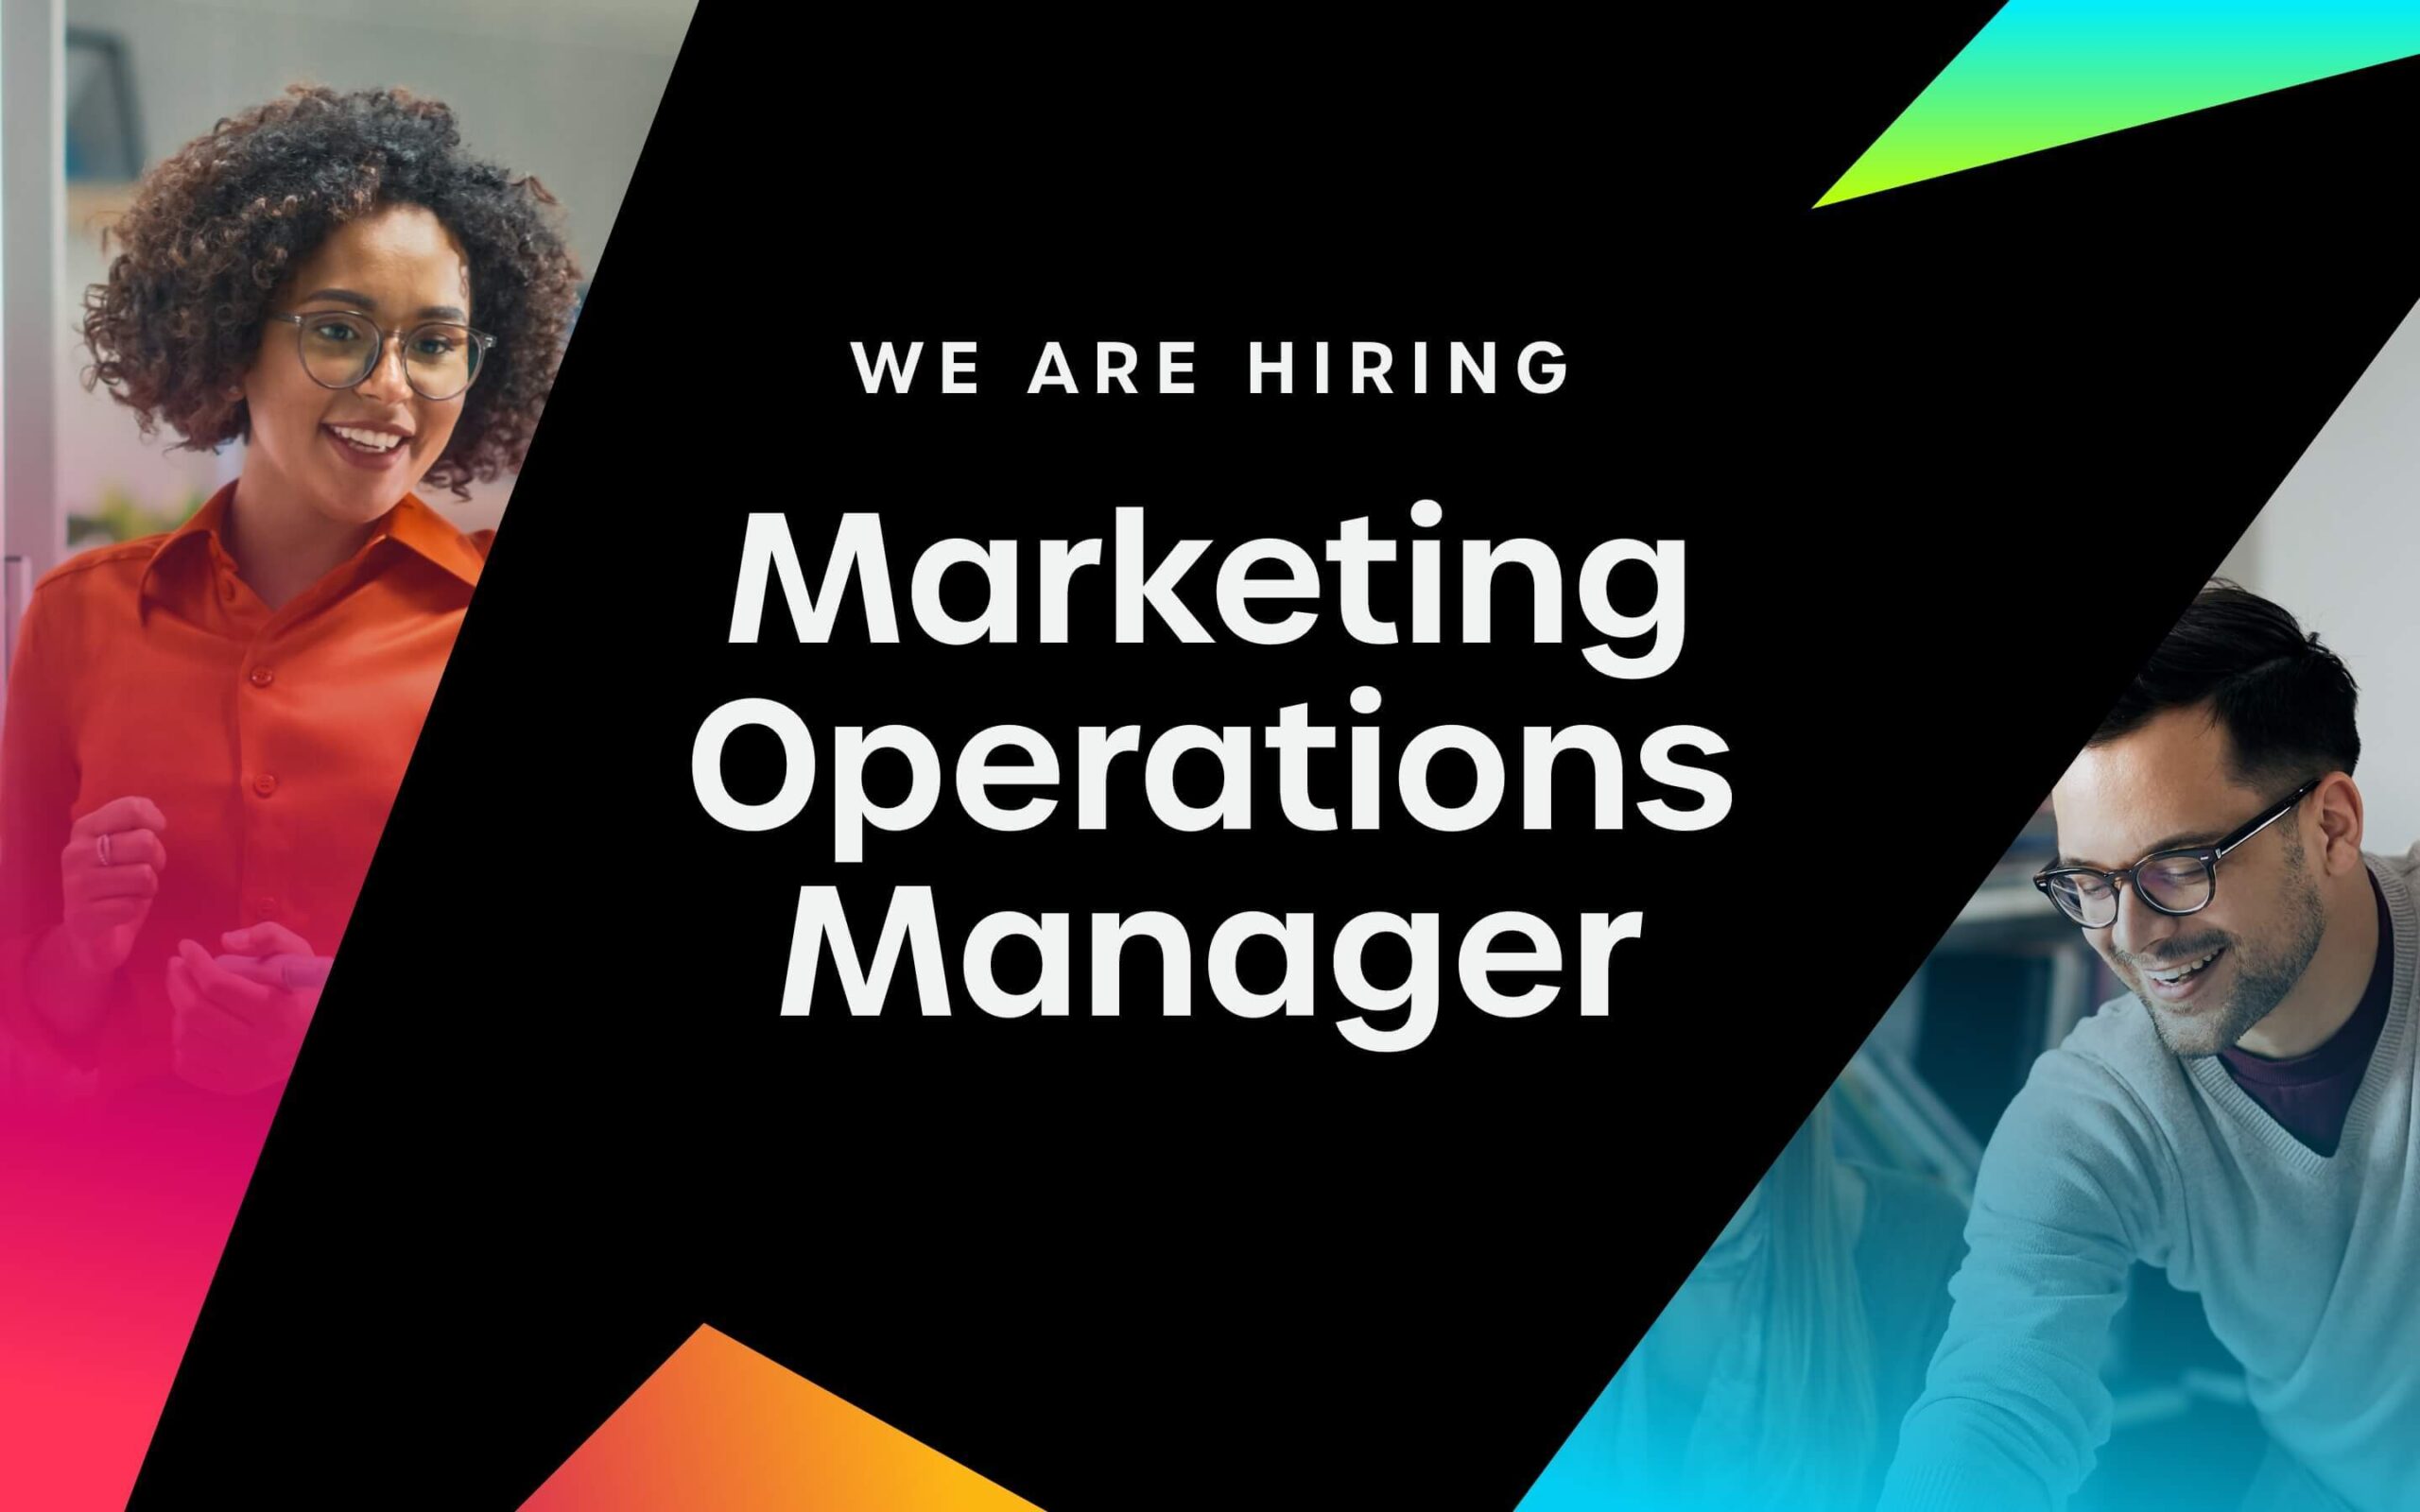 Graphic to promote our Marketing Operations Manager role